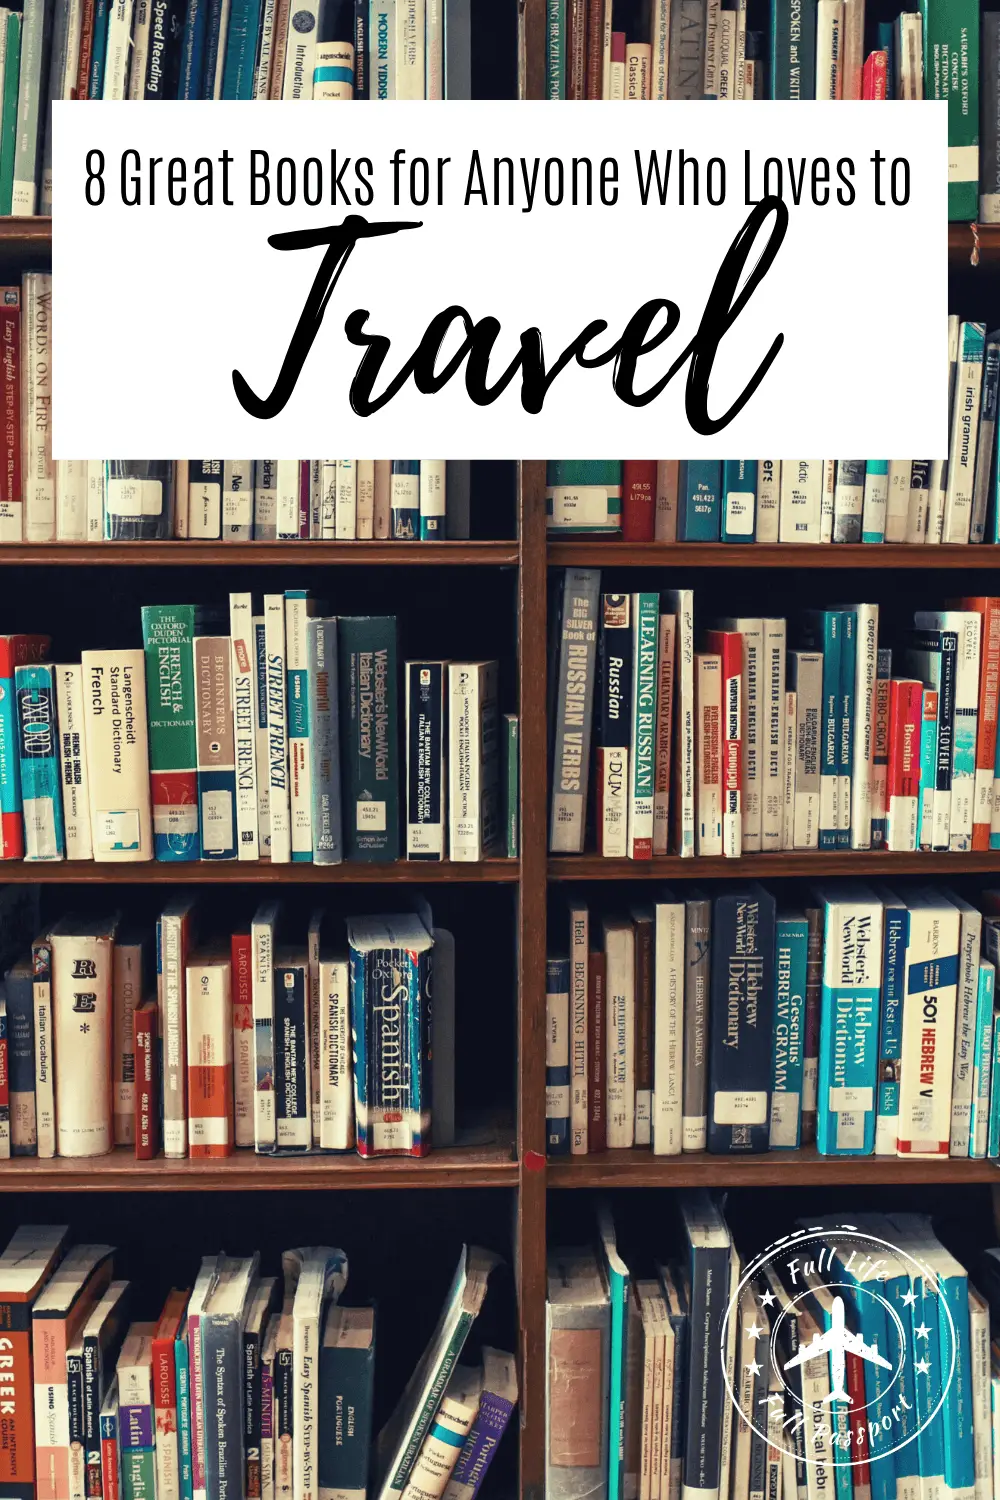 8 Books About Travel to Read While You\'re Stuck at Home Due to COVID-19